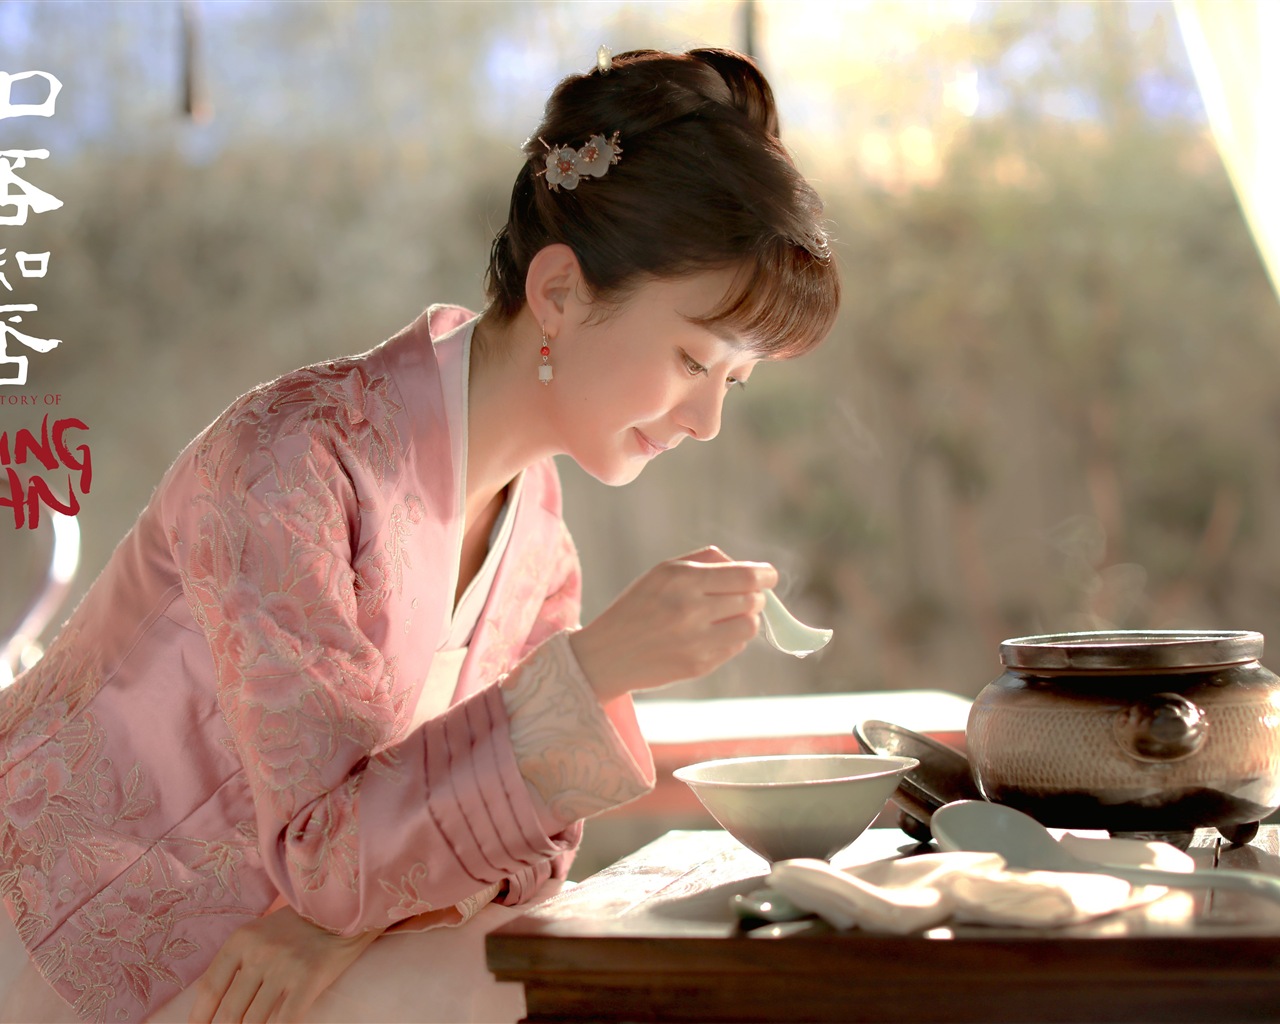 The Story Of MingLan, TV series HD wallpapers #29 - 1280x1024